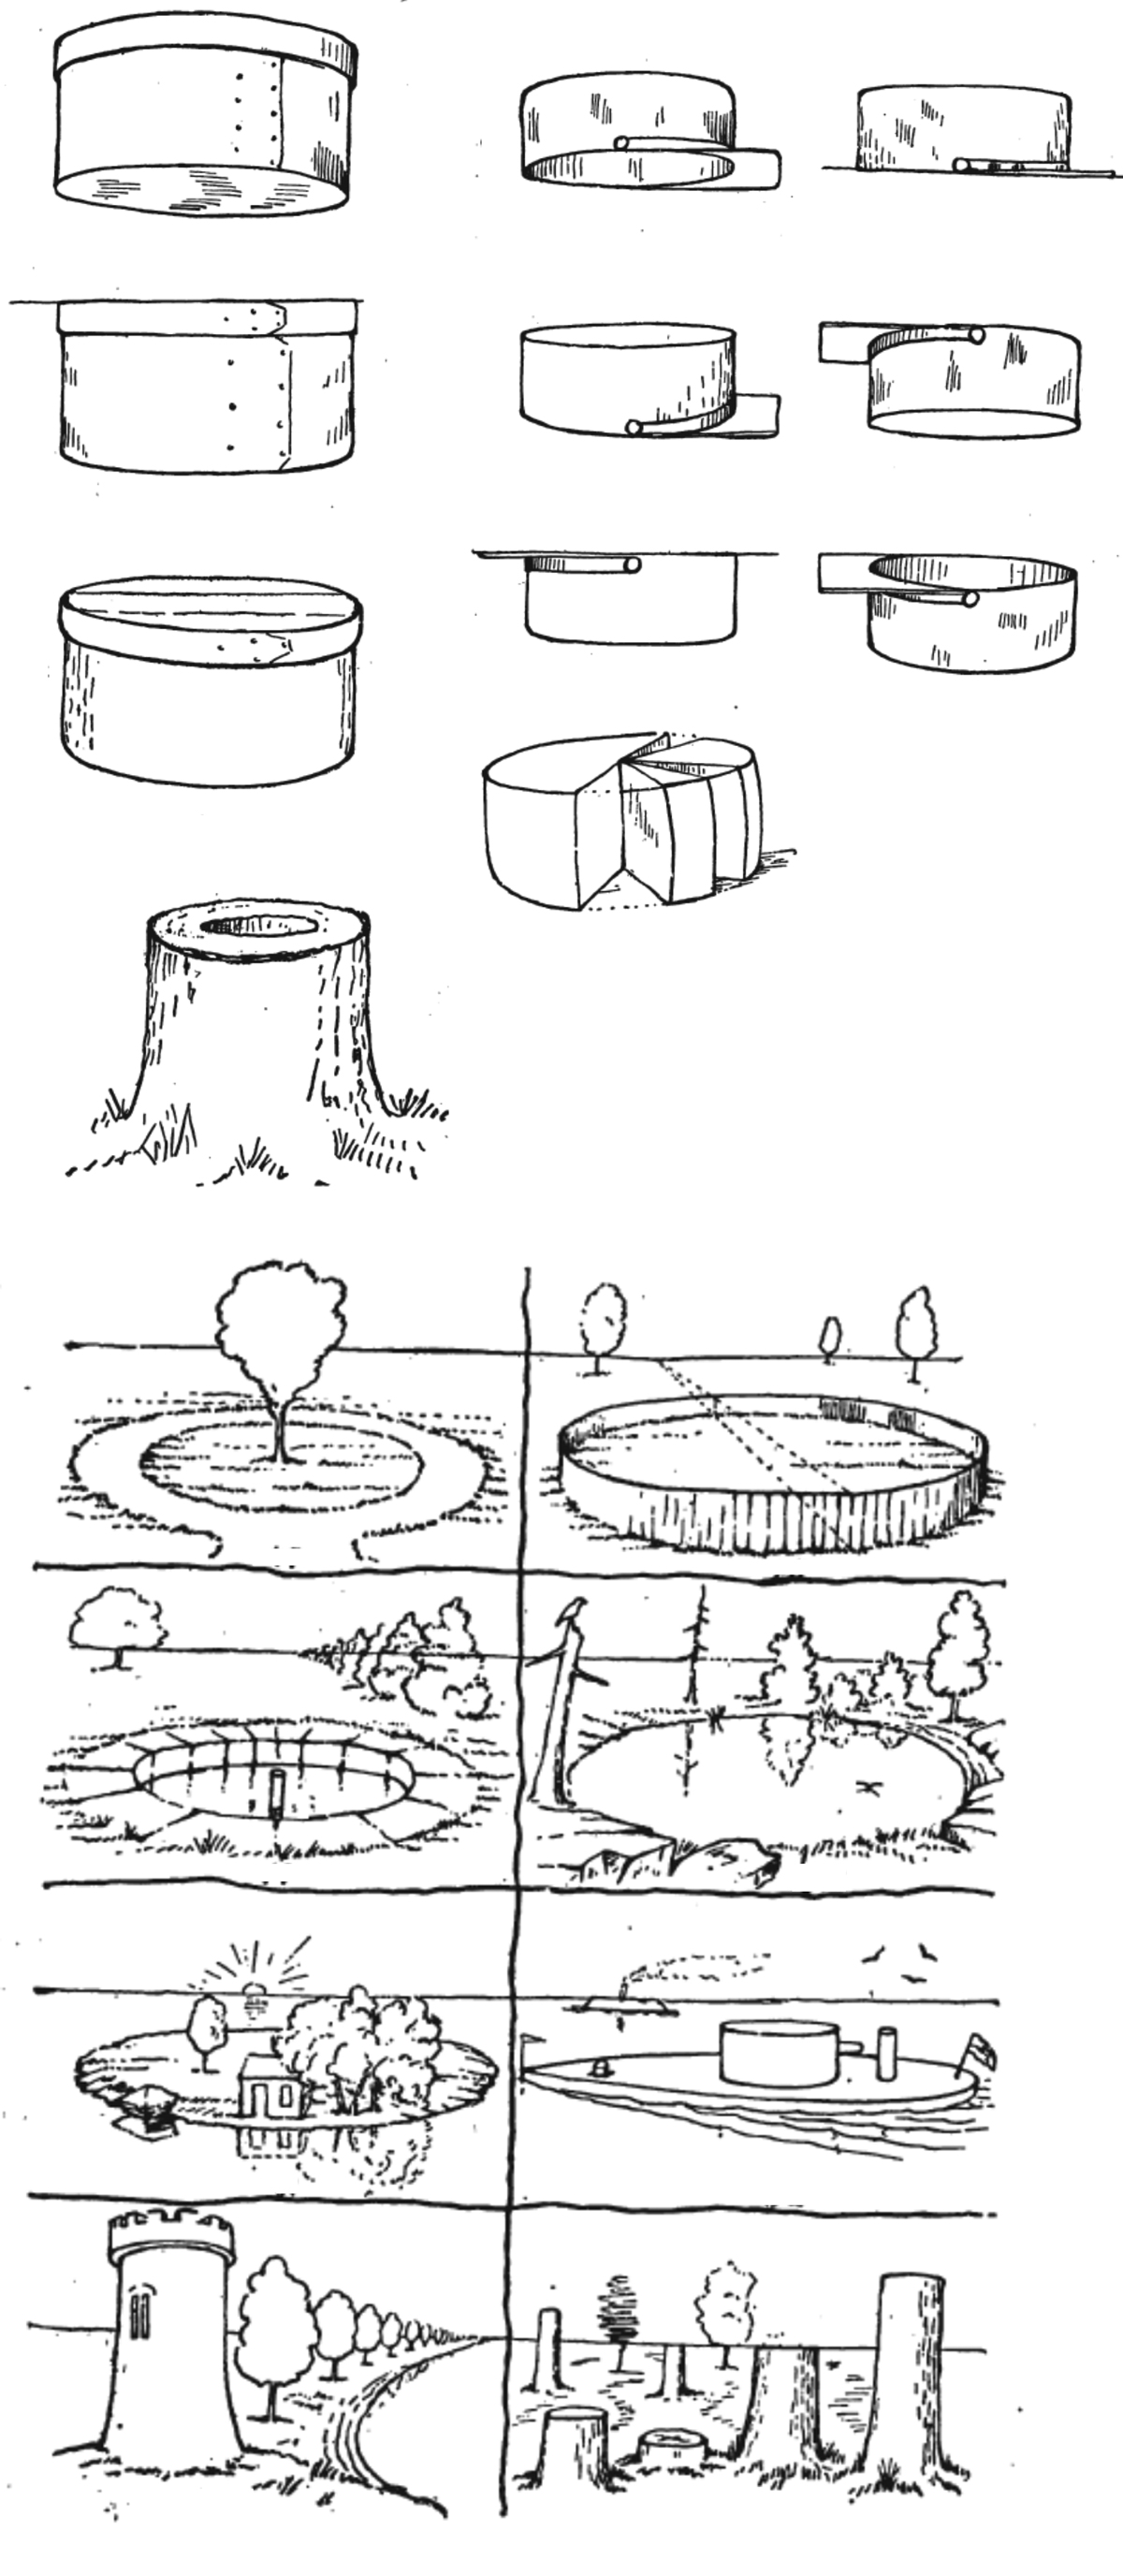 Drawing things and objects with cylinders